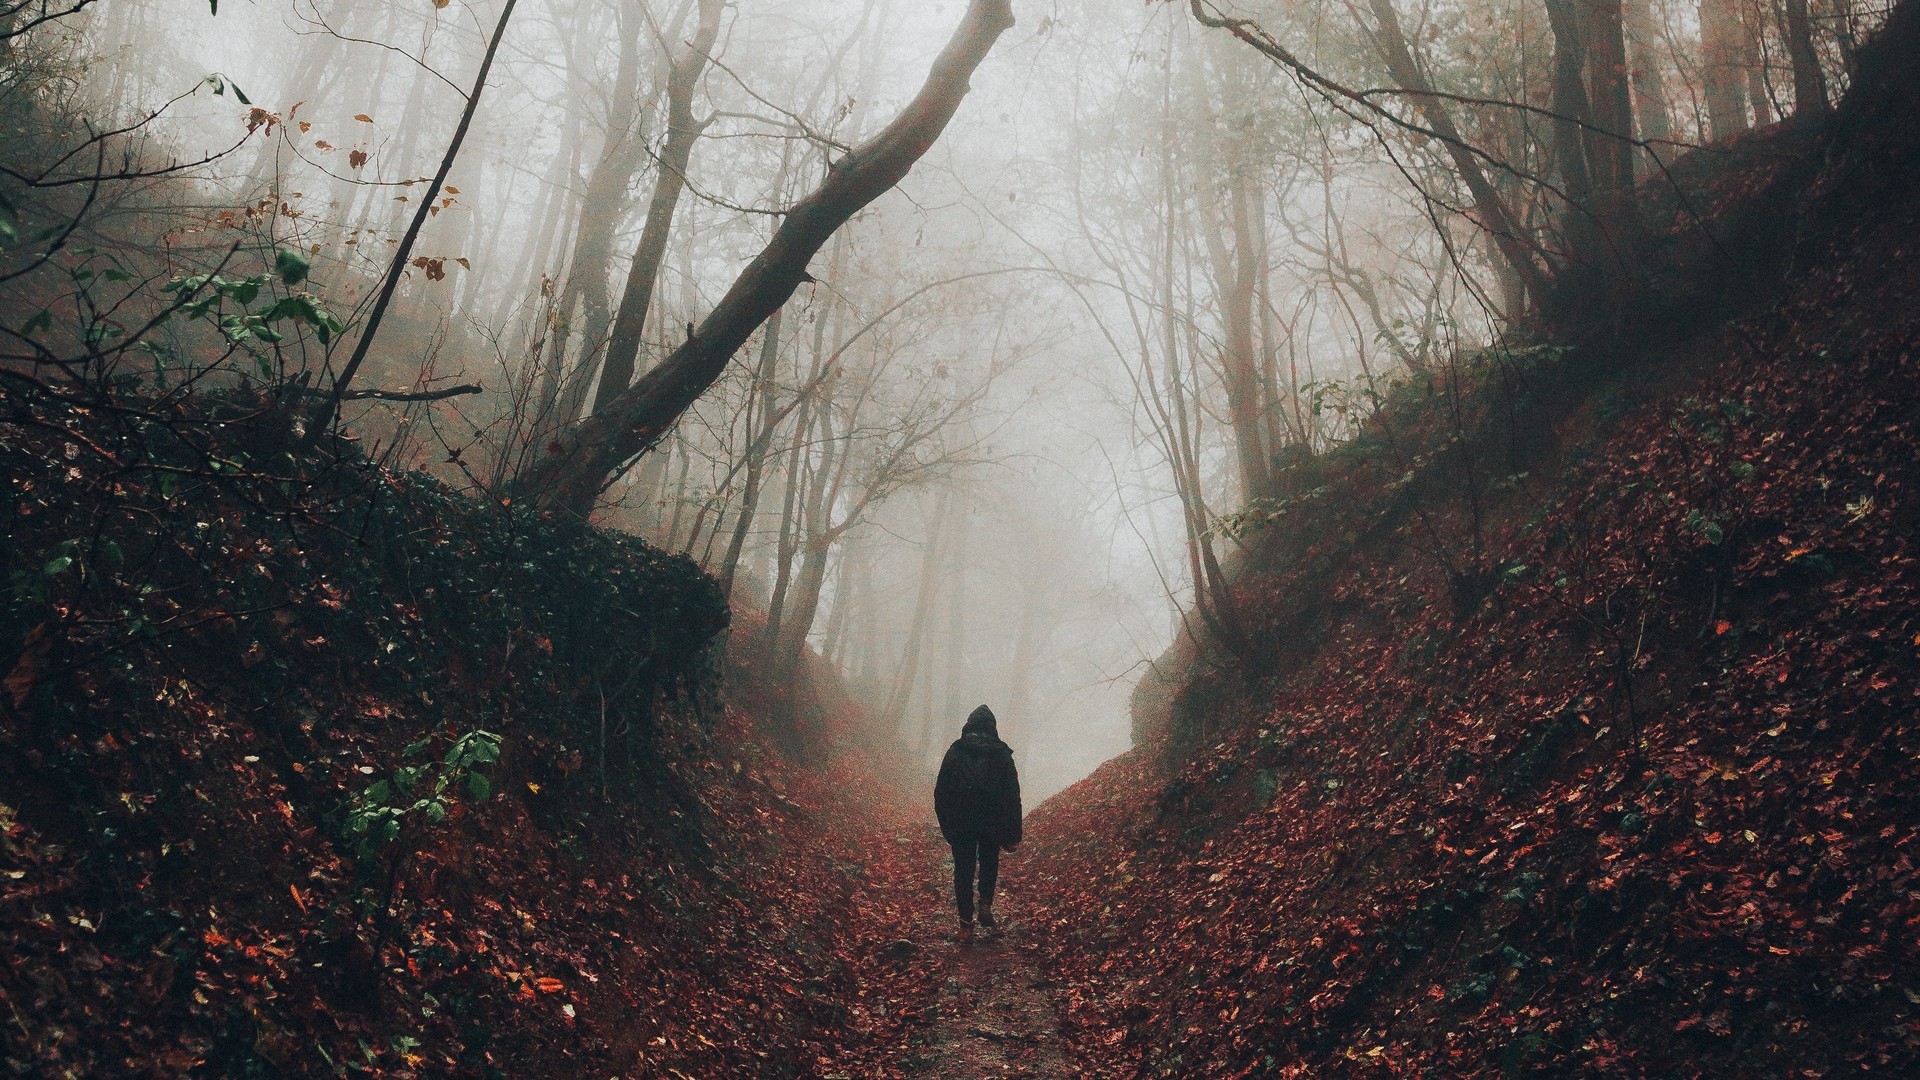 1920x1080 wallpapers: silhouette, fog, forest, loneliness, walk (image)